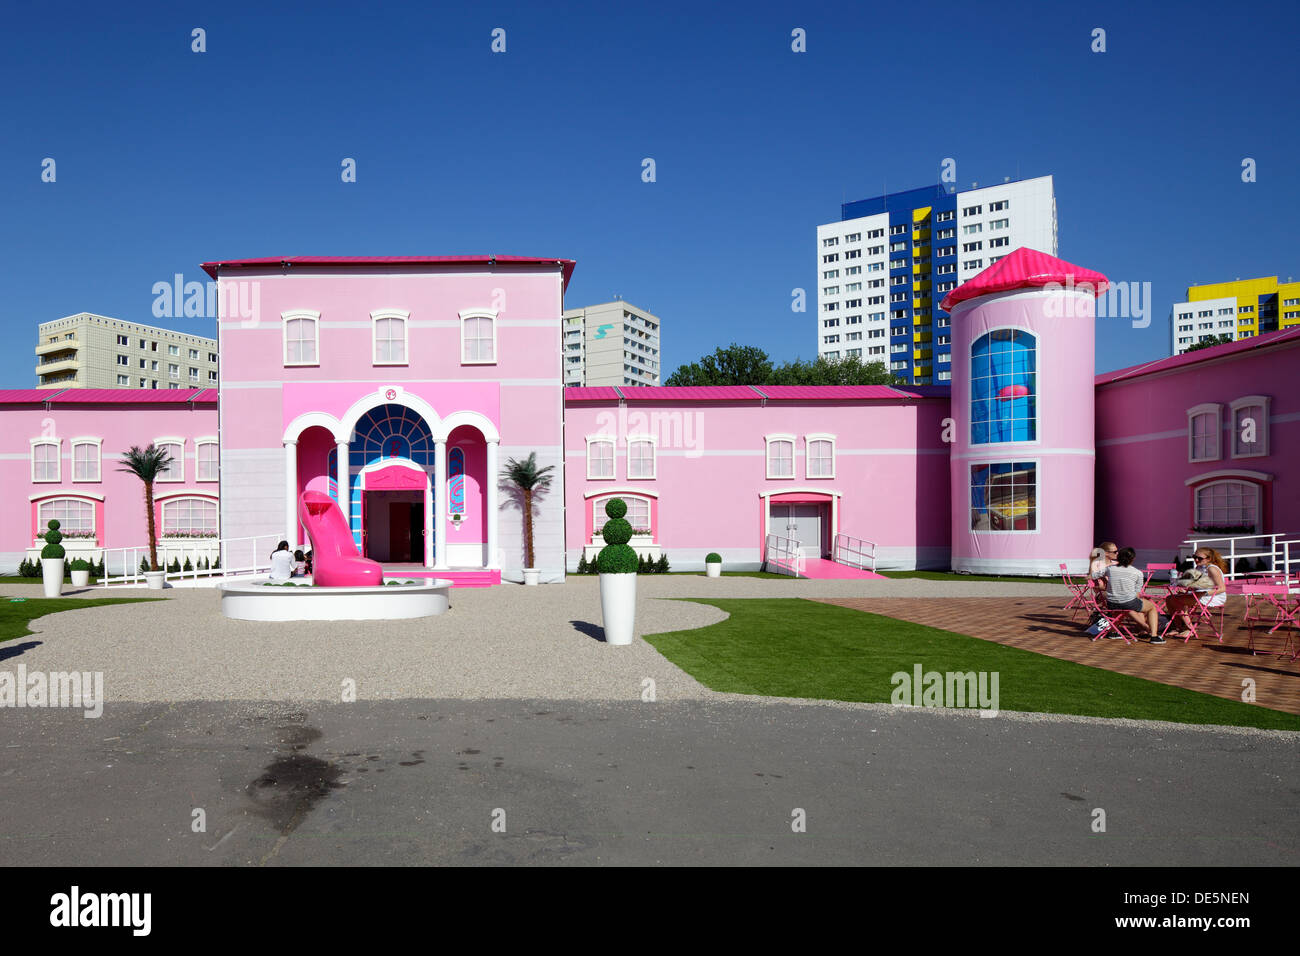 Our Pinks Dreams Have Come True! Barbie's Dreamhouse Opens Its Doors In  Florida | Barbie room, Barbie house, Barbie dream house